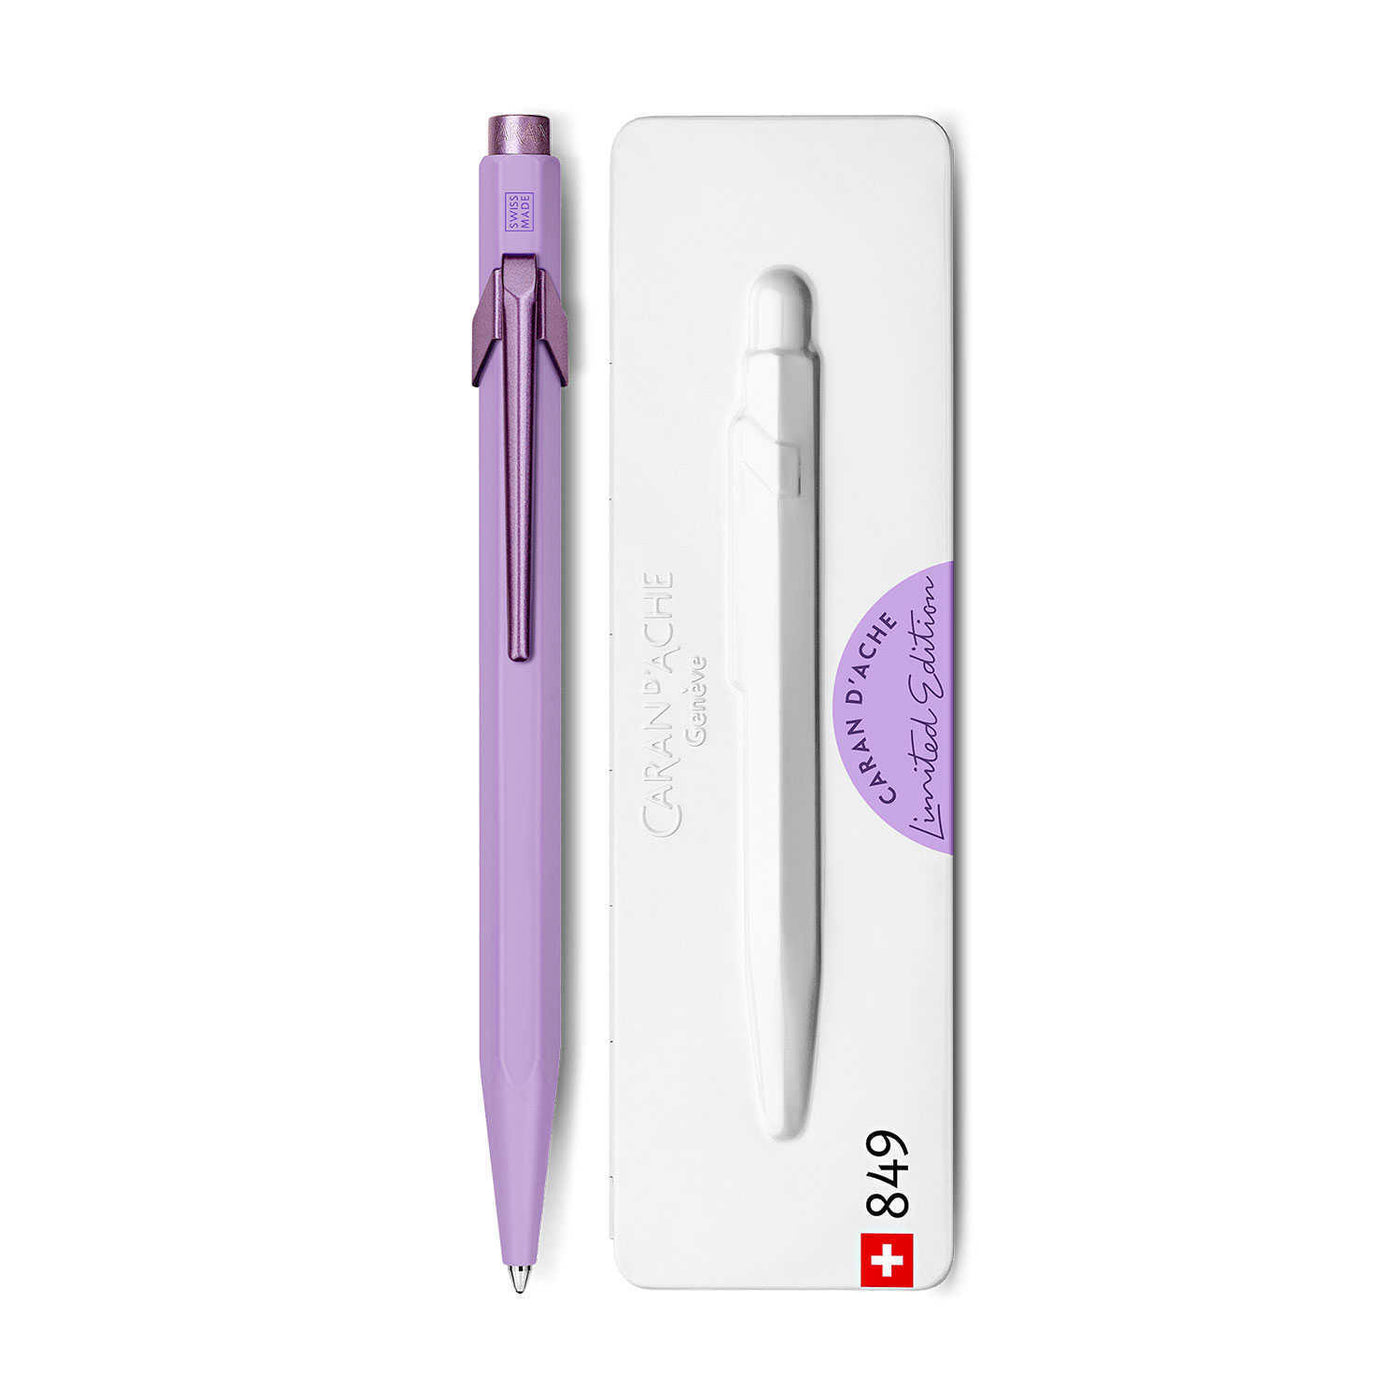 Caran d'Ache 849 Claim Your Style Ball Pen - Violet (Limited Edition) 2